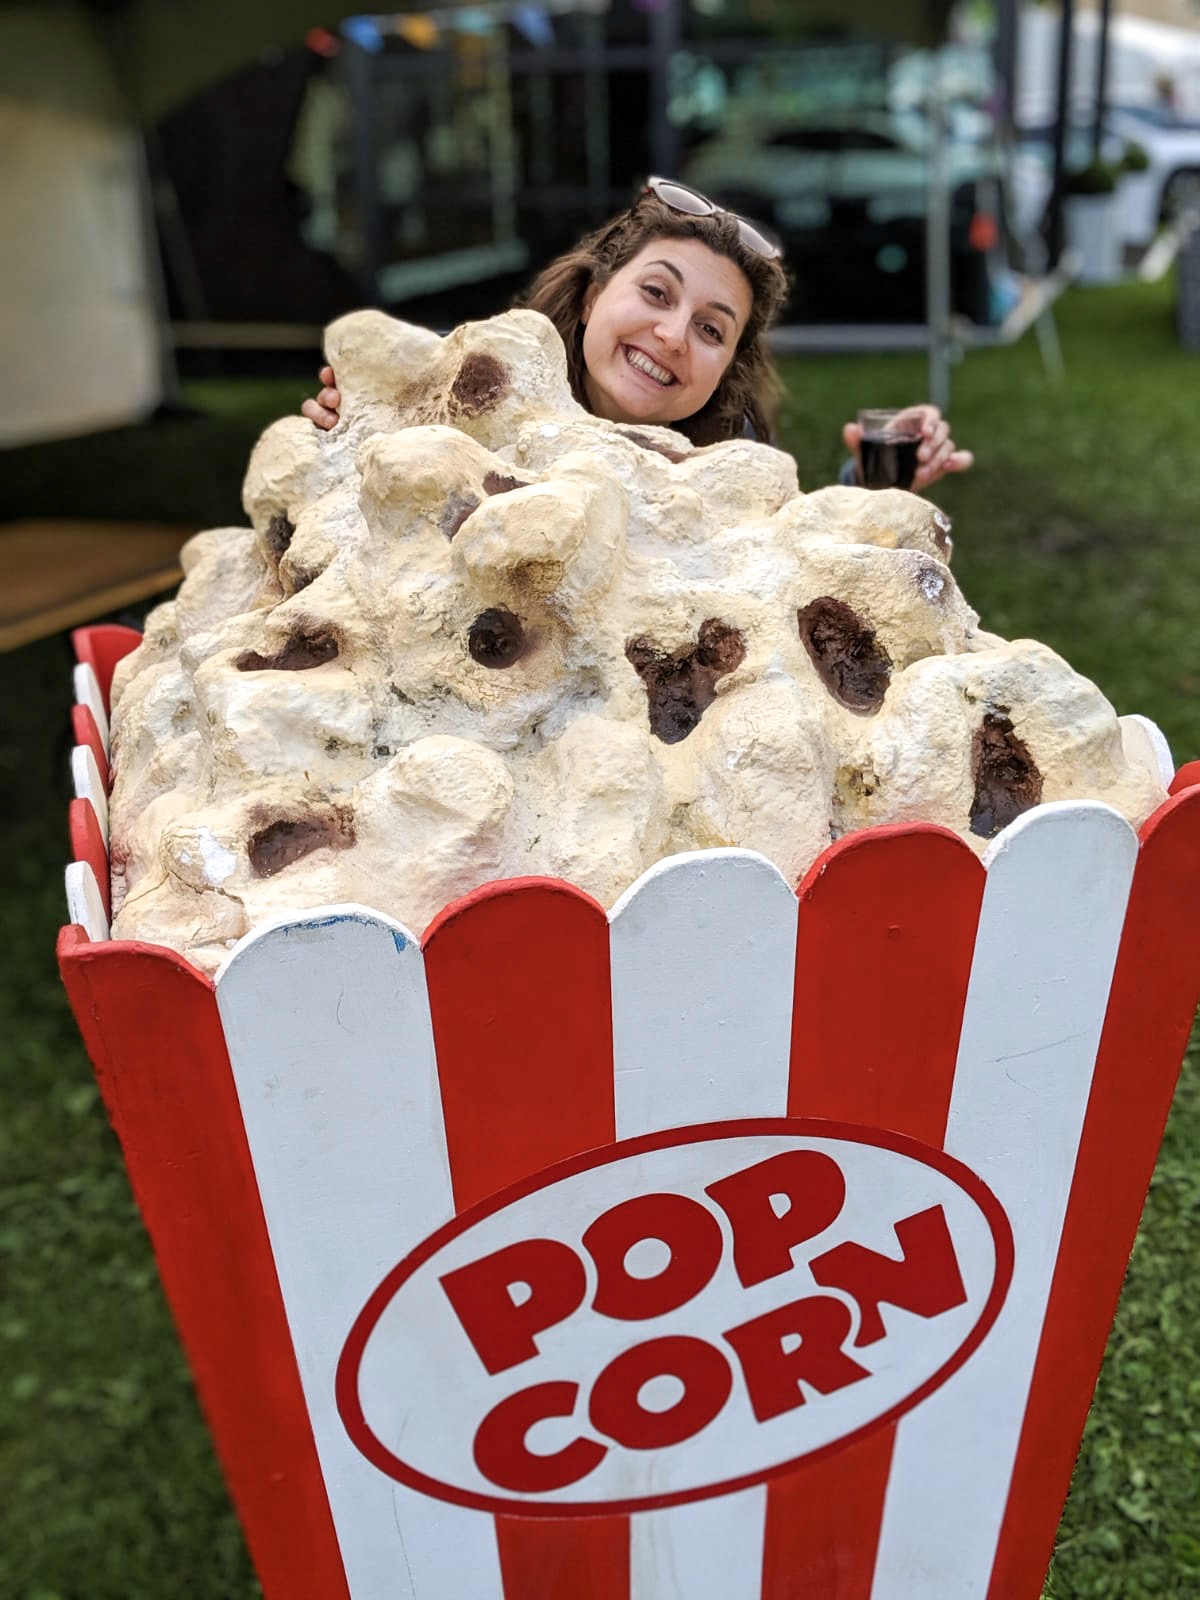 girl looking silly behind a giant box of popcorn with glass of red wine in her hand 